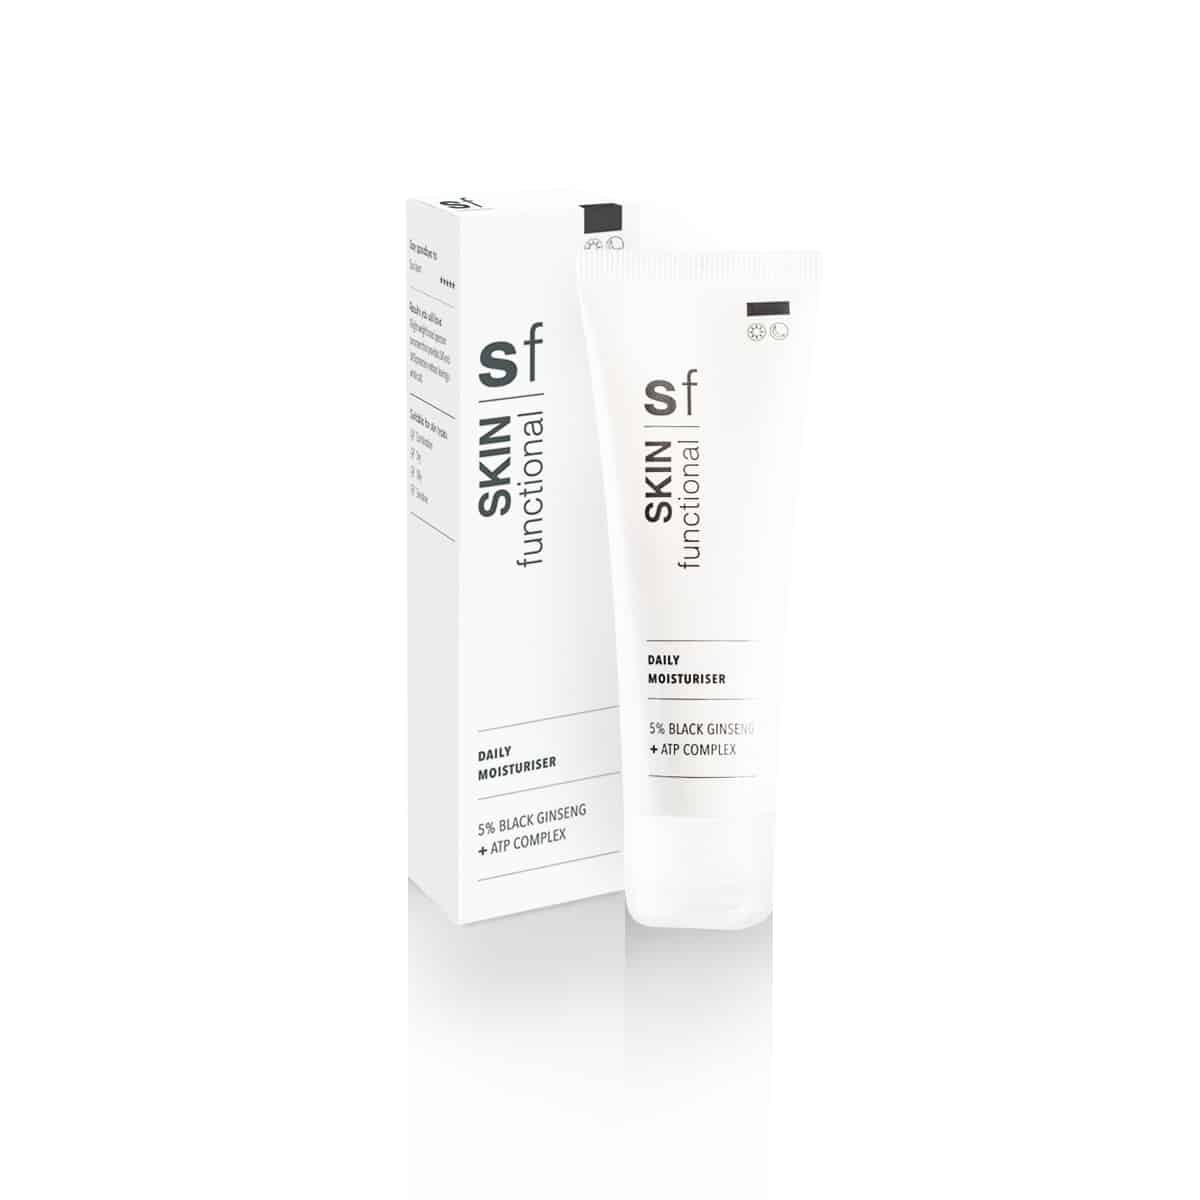 A tube of SKIN Functional - 5% Black Ginseng + ATP Complex - Daily Moisturiser on a white background.